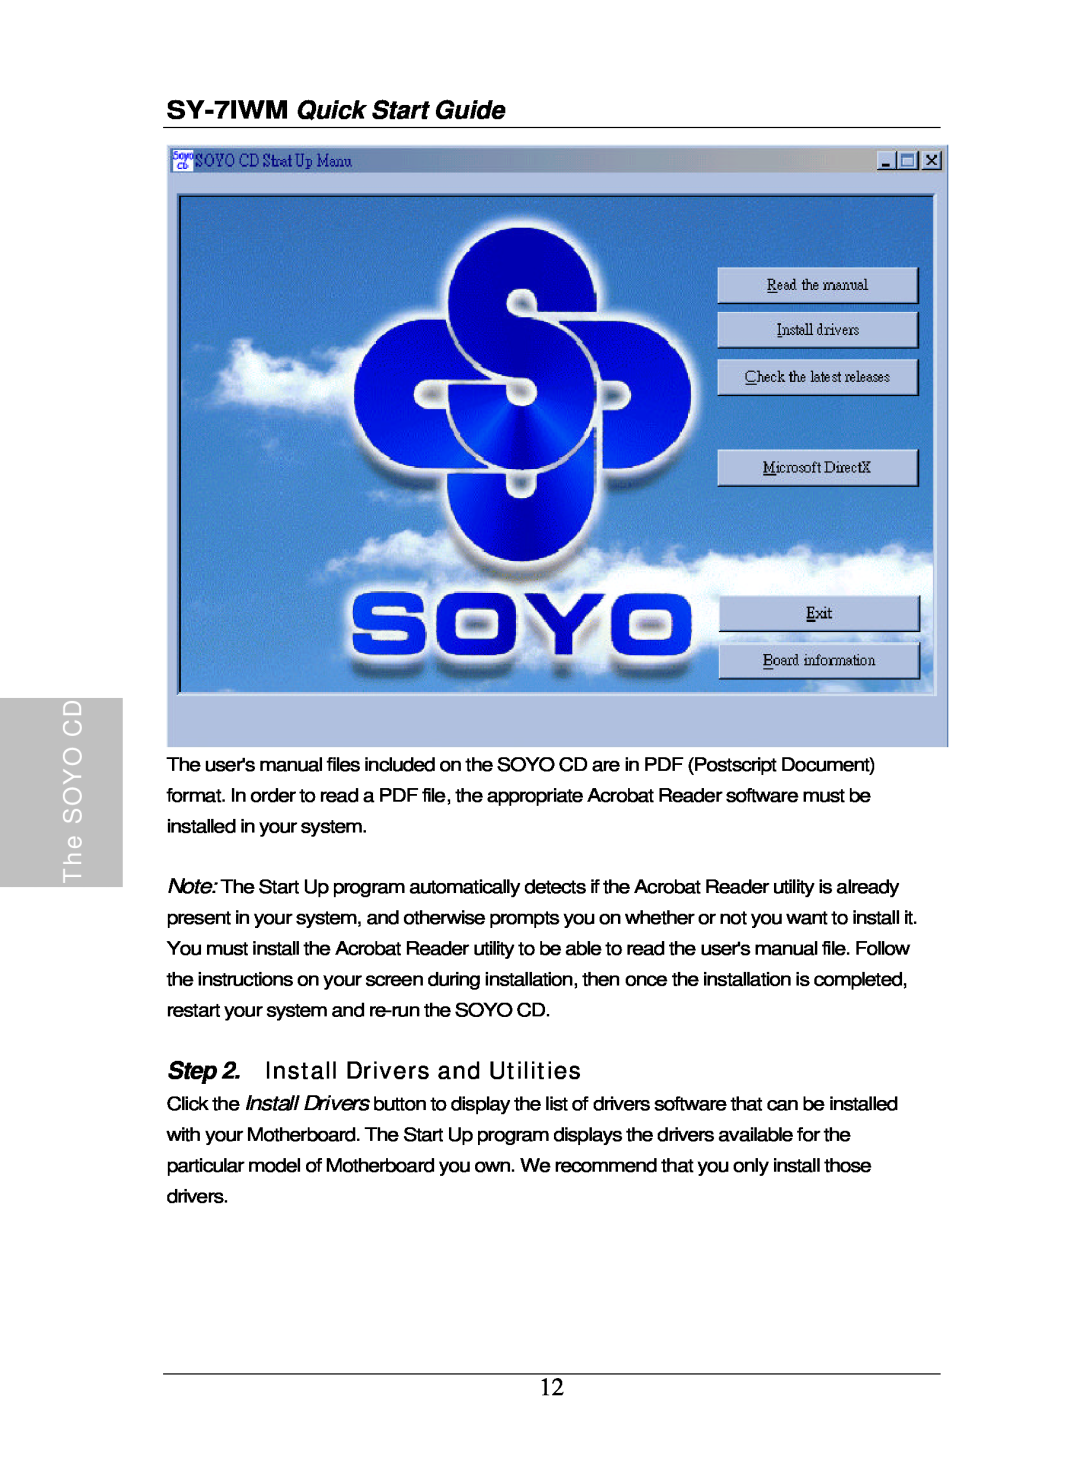 SOYO quick start Install Drivers and Utilities, The SOYO CD, SY-7IWM Quick Start Guide 